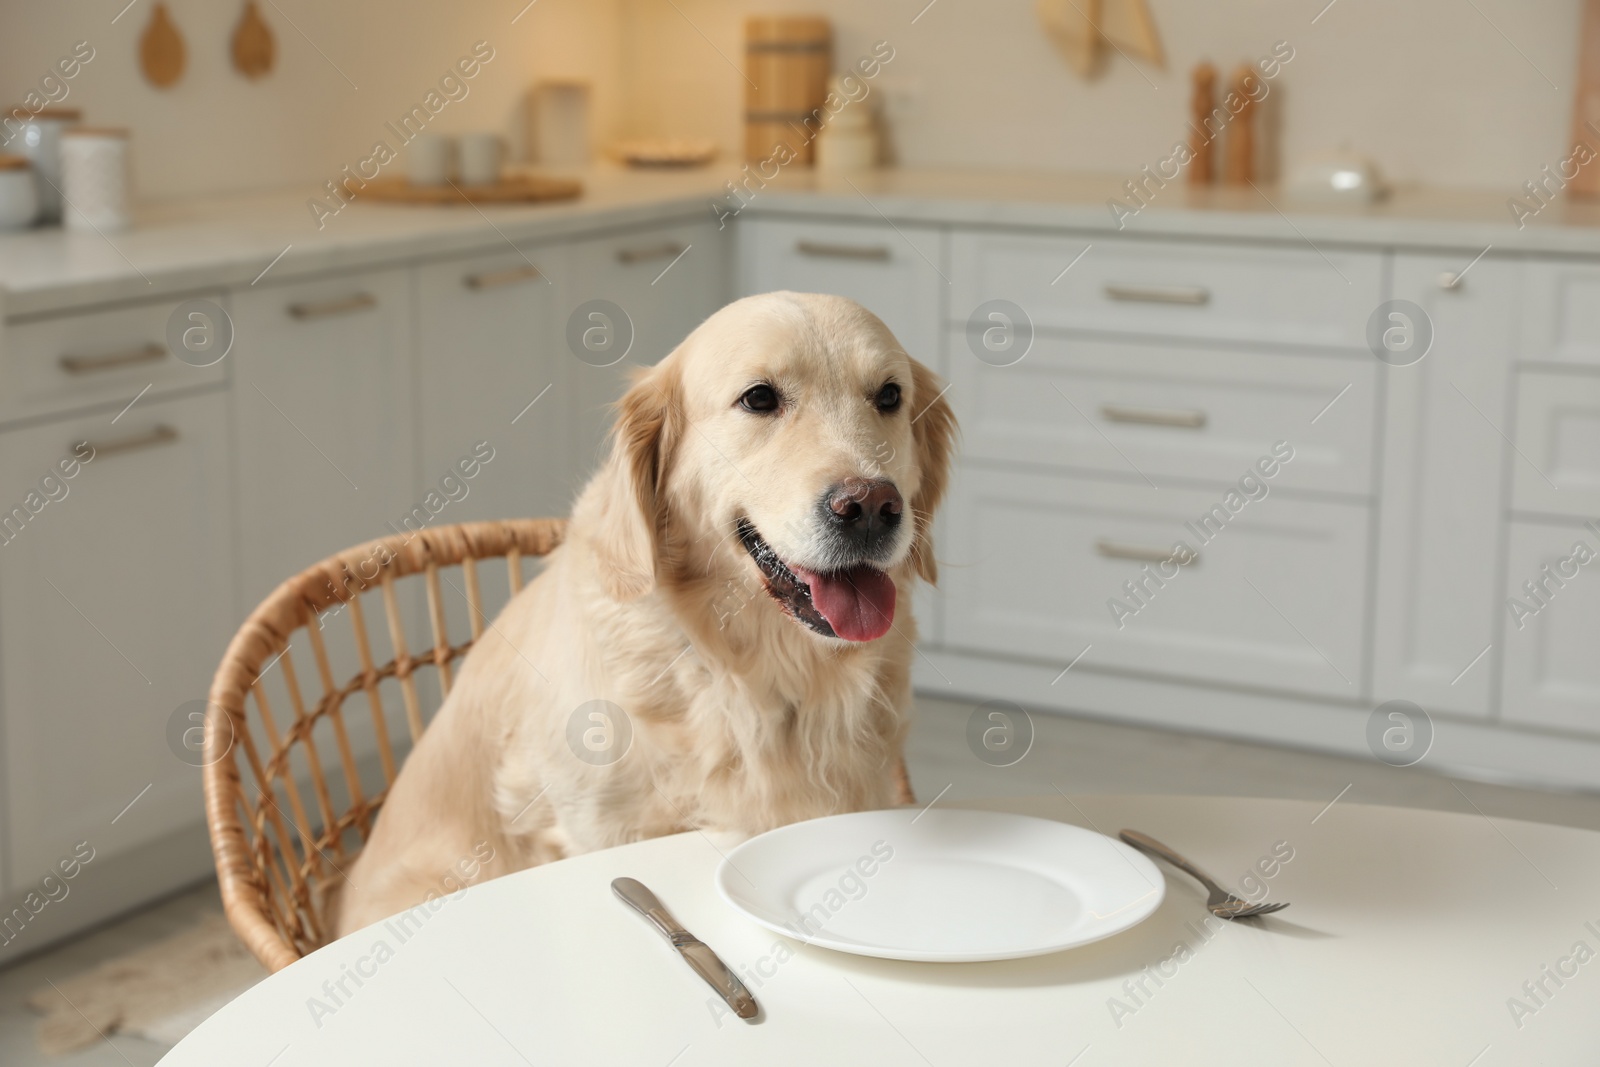 Photo of Cute hungry dog waiting for food at table with empty plate in kitchen